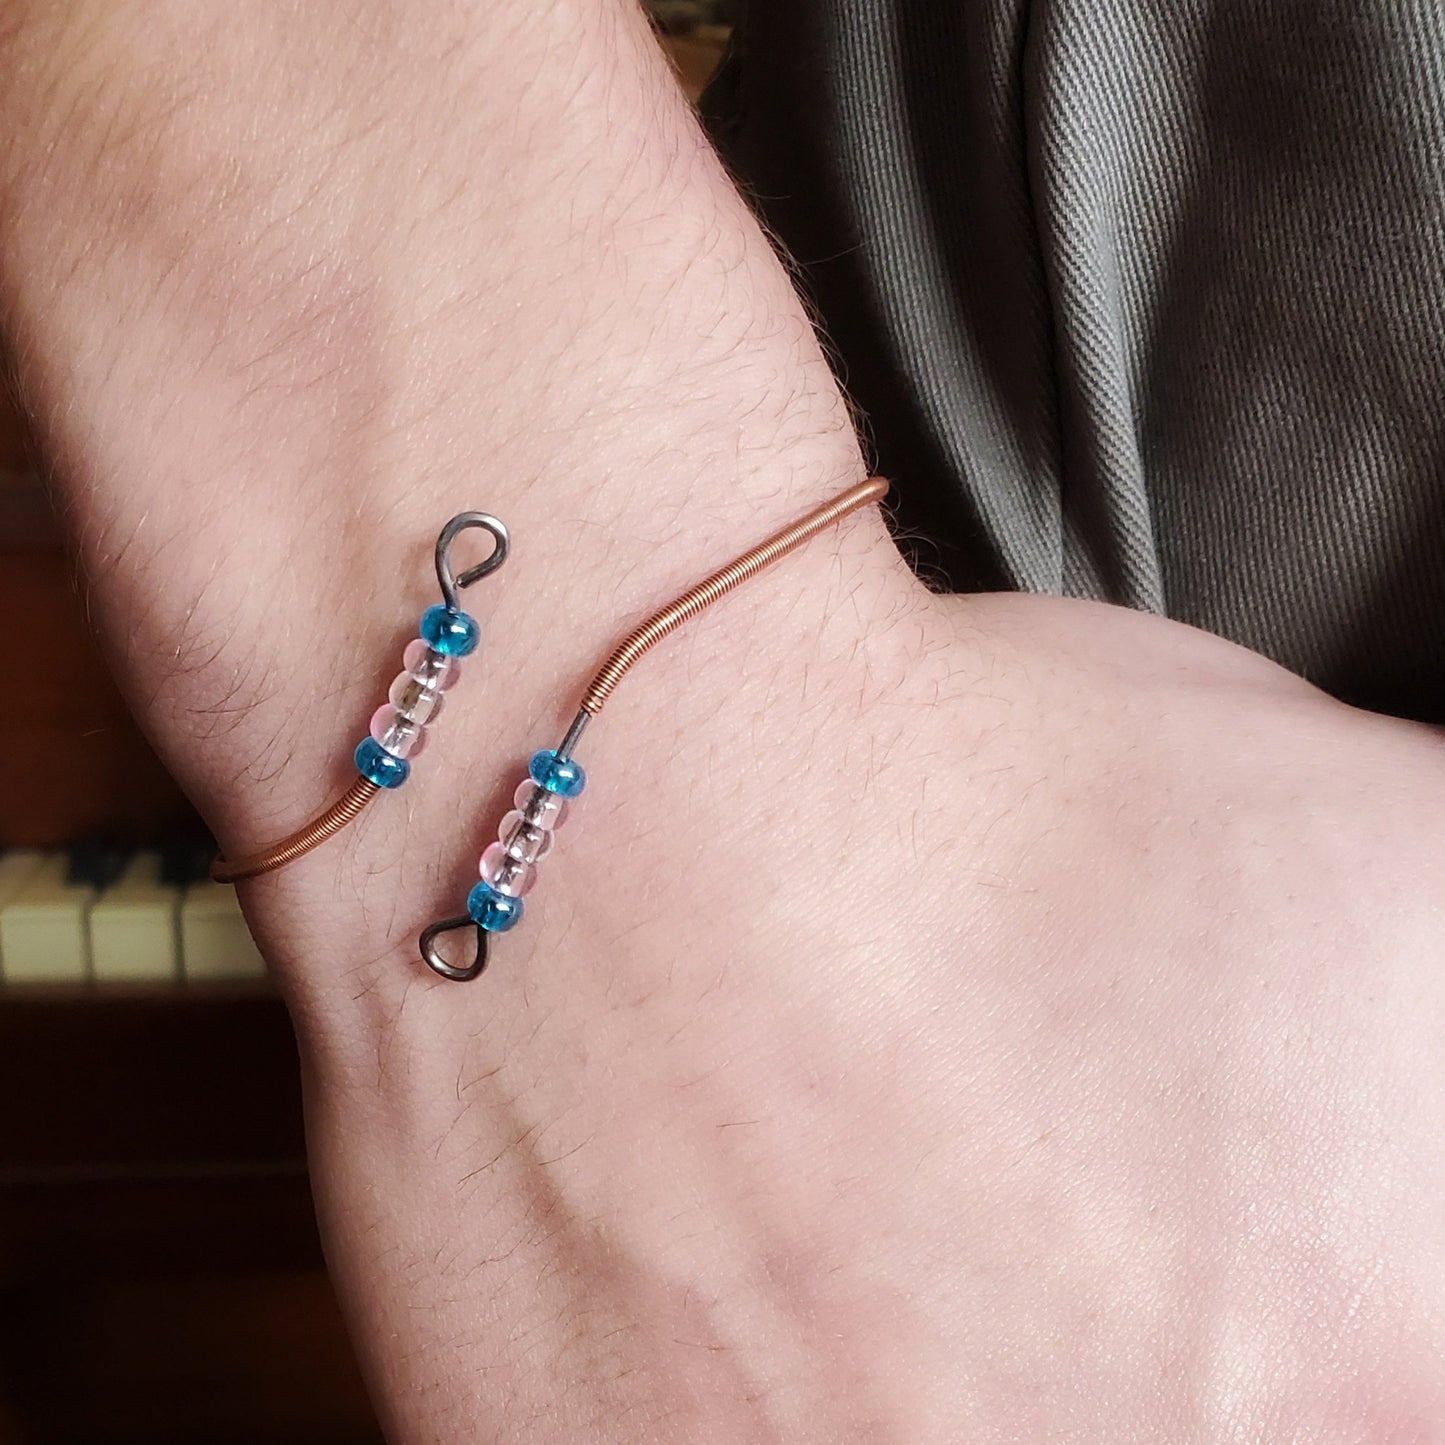 wrist with bracelet with beads representing the colours of the trans pride flag 